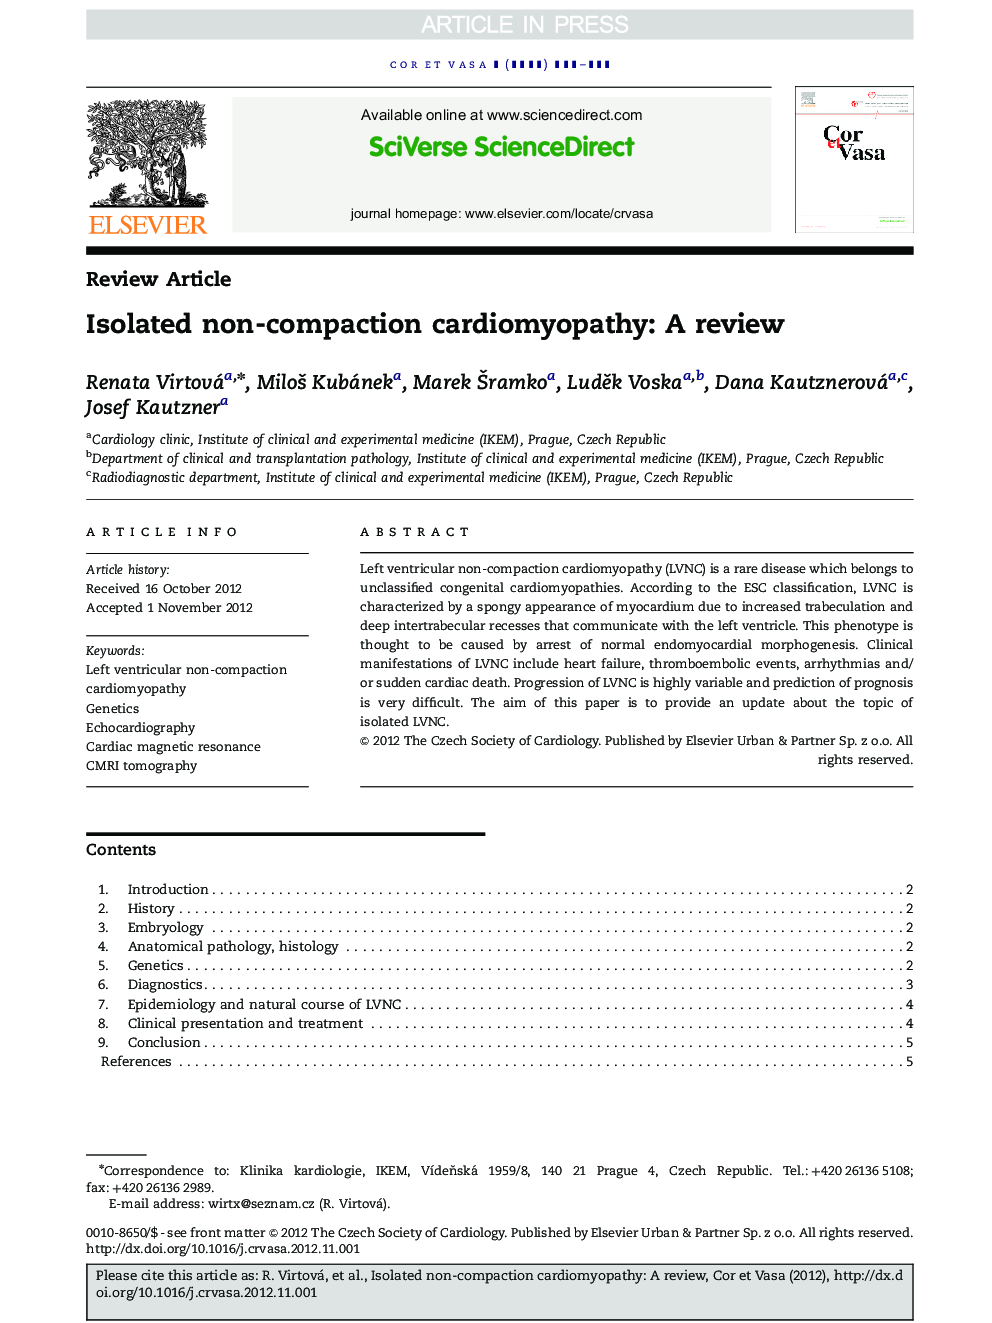 Isolated non-compaction cardiomyopathy: A review